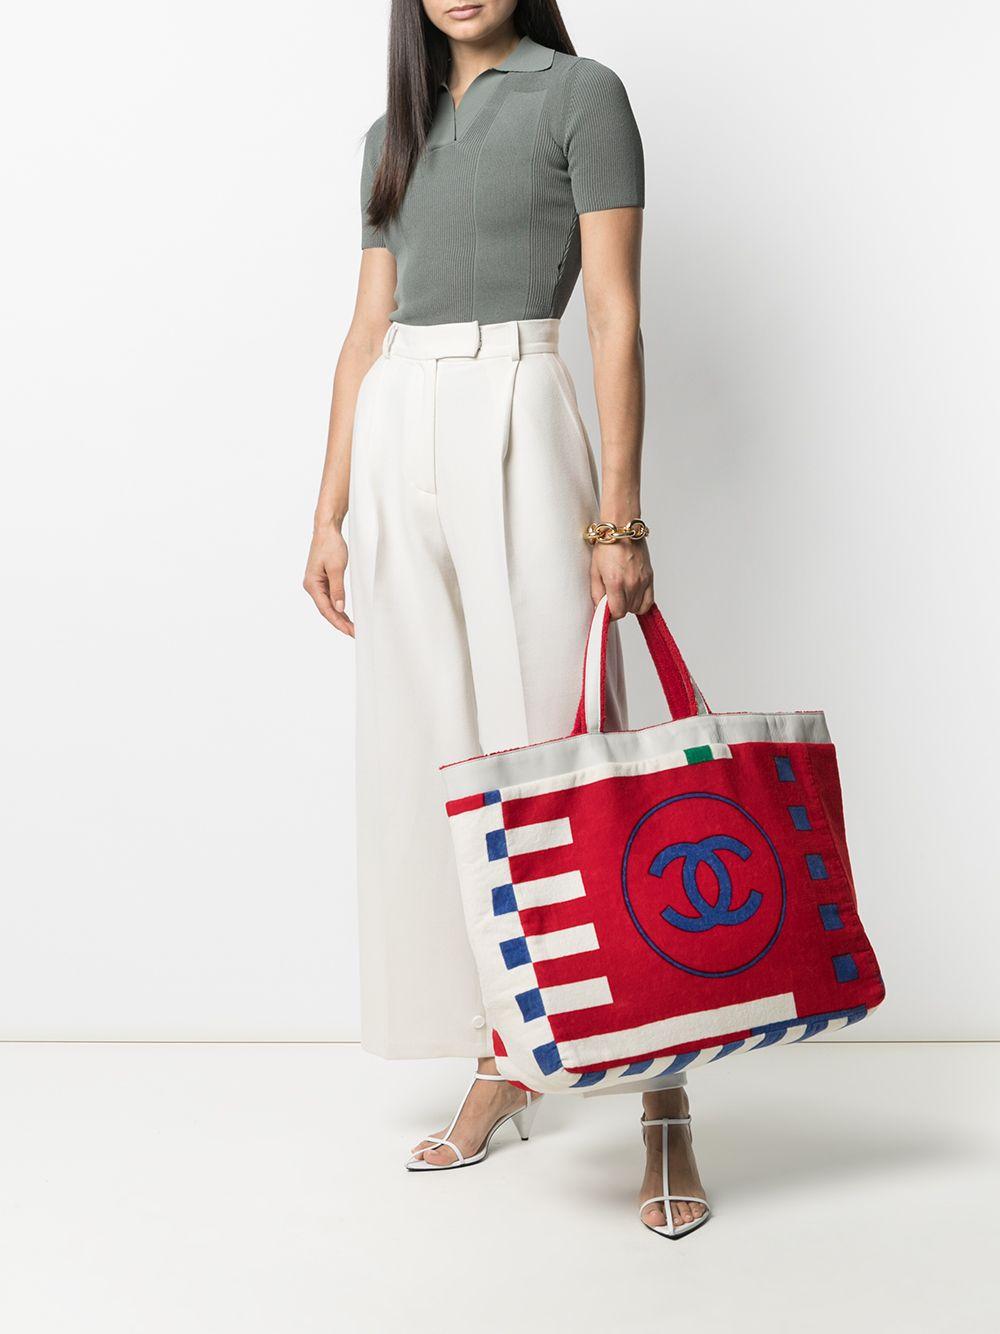 Chanel Vintage Jumbo Large CC Reversible Multicolor Lego Two Tone Red Beach Tote

white/blue/red
cotton
textured finish
logo print to the front
open top
two top handles
full lining

Made in Italy